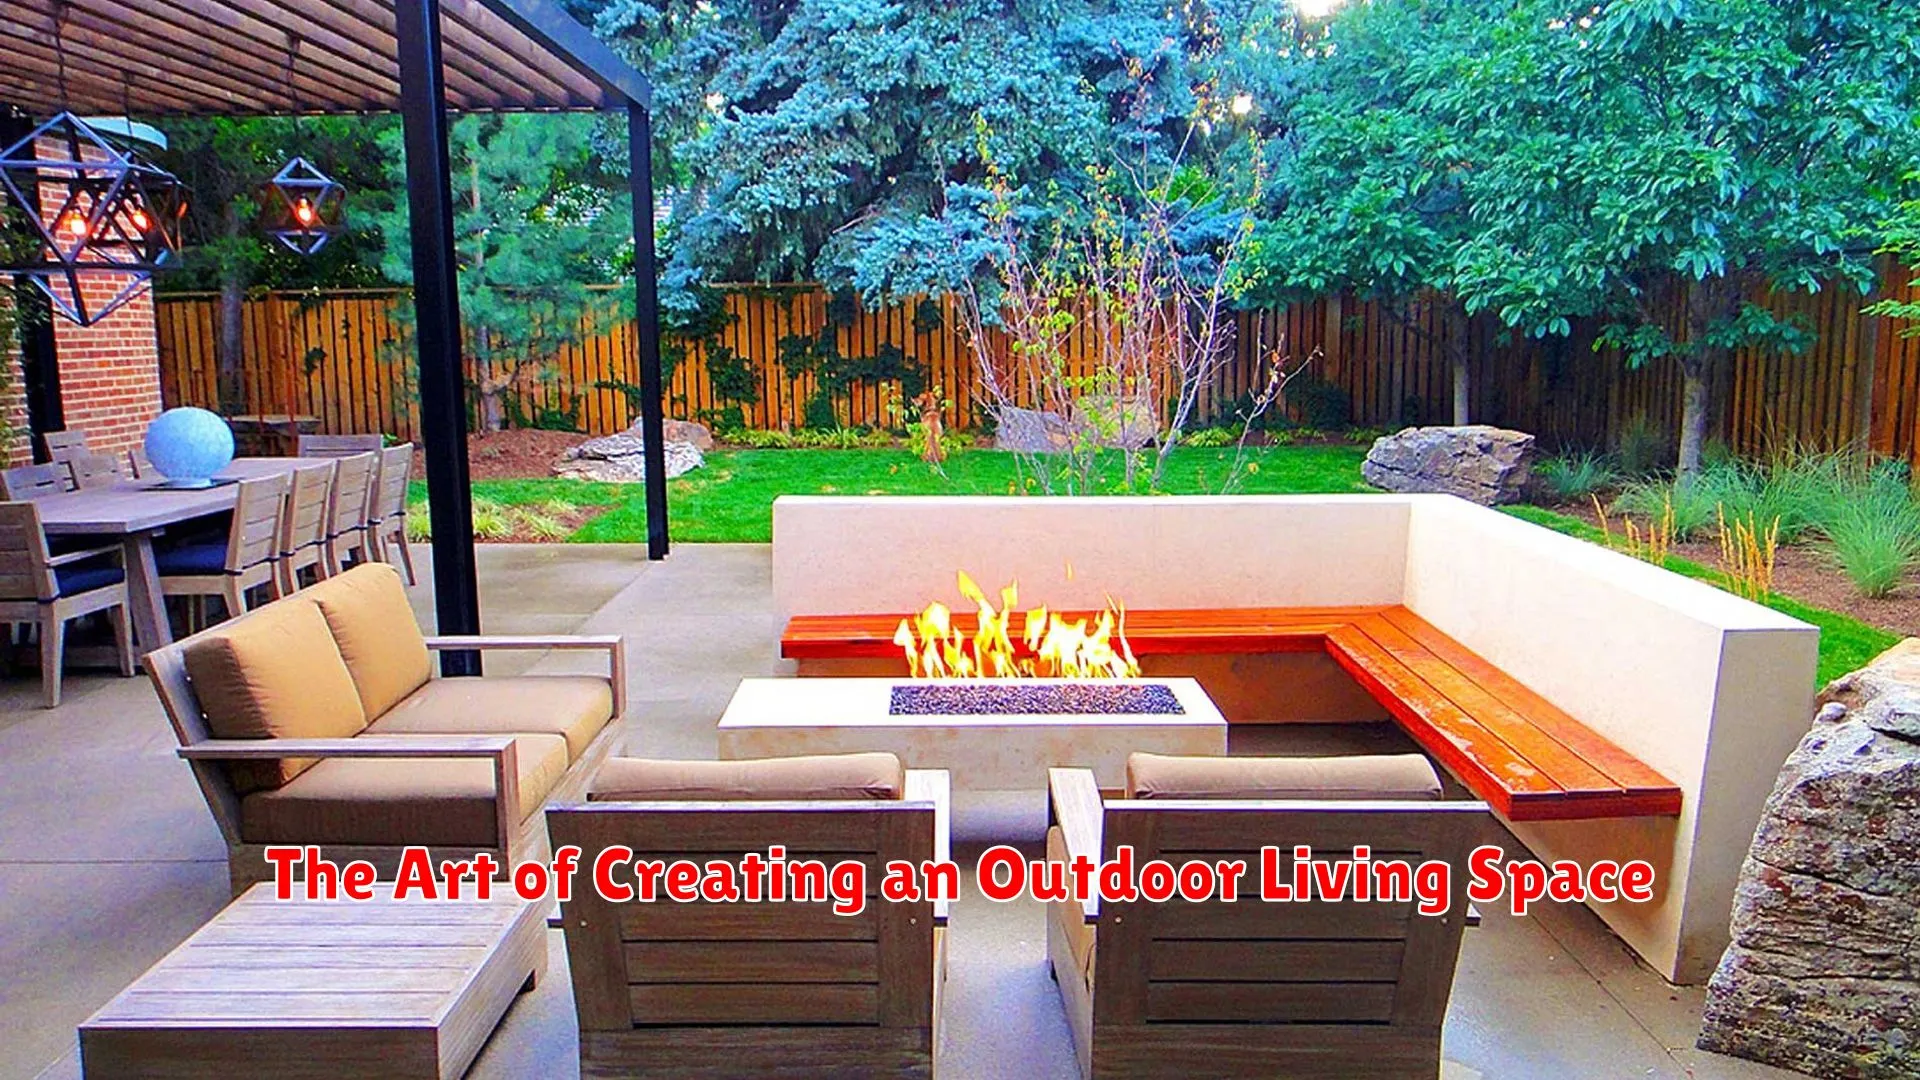 The Art of Creating an Outdoor Living Space